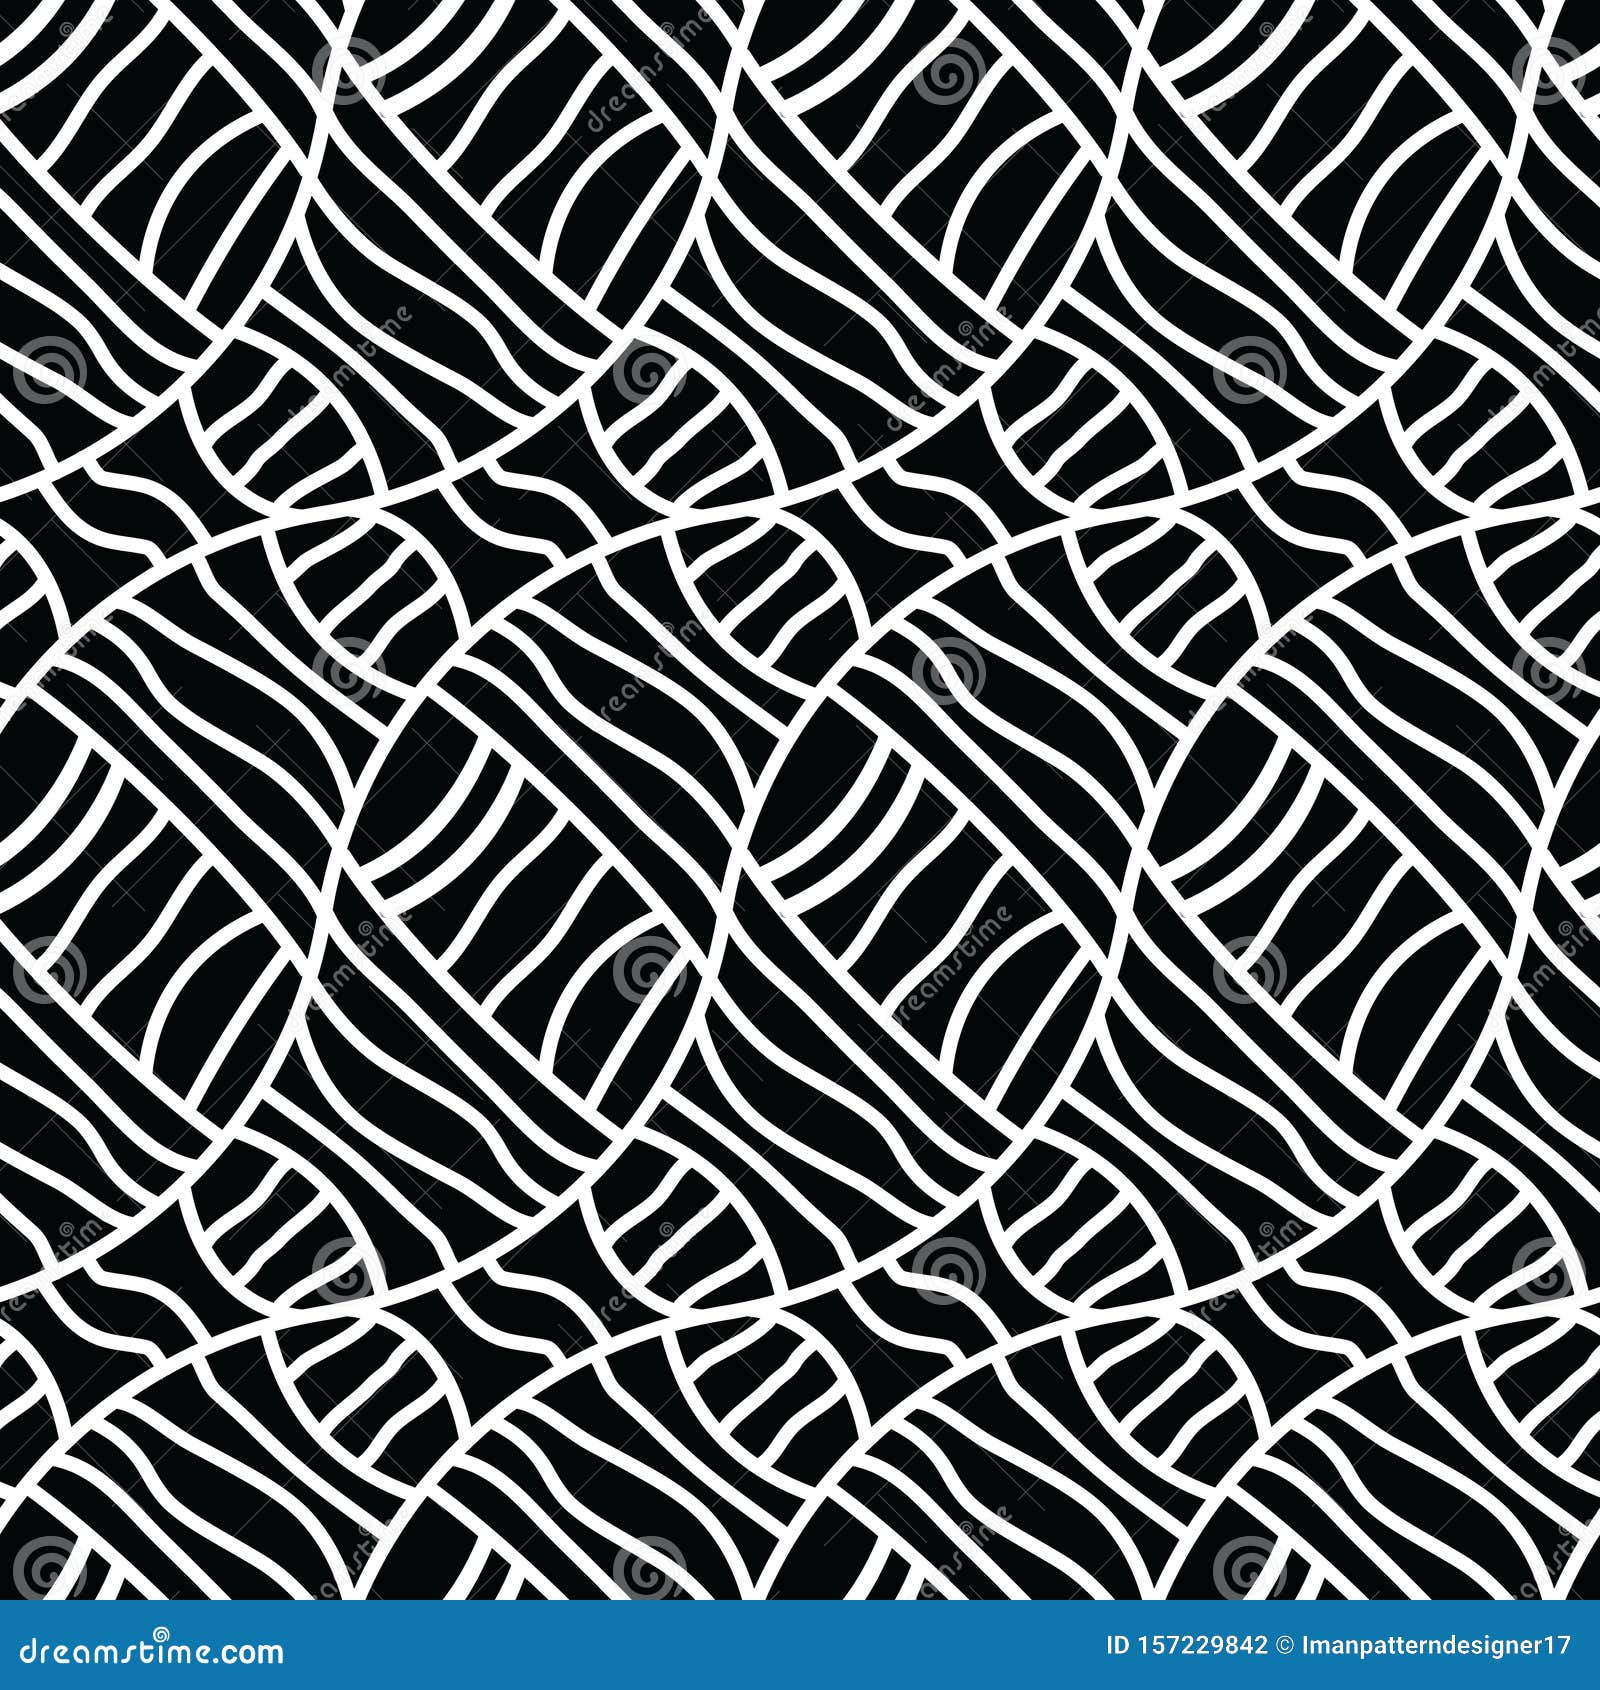 Organic Black And White Geometric Abstract Seamless Pattern Tile